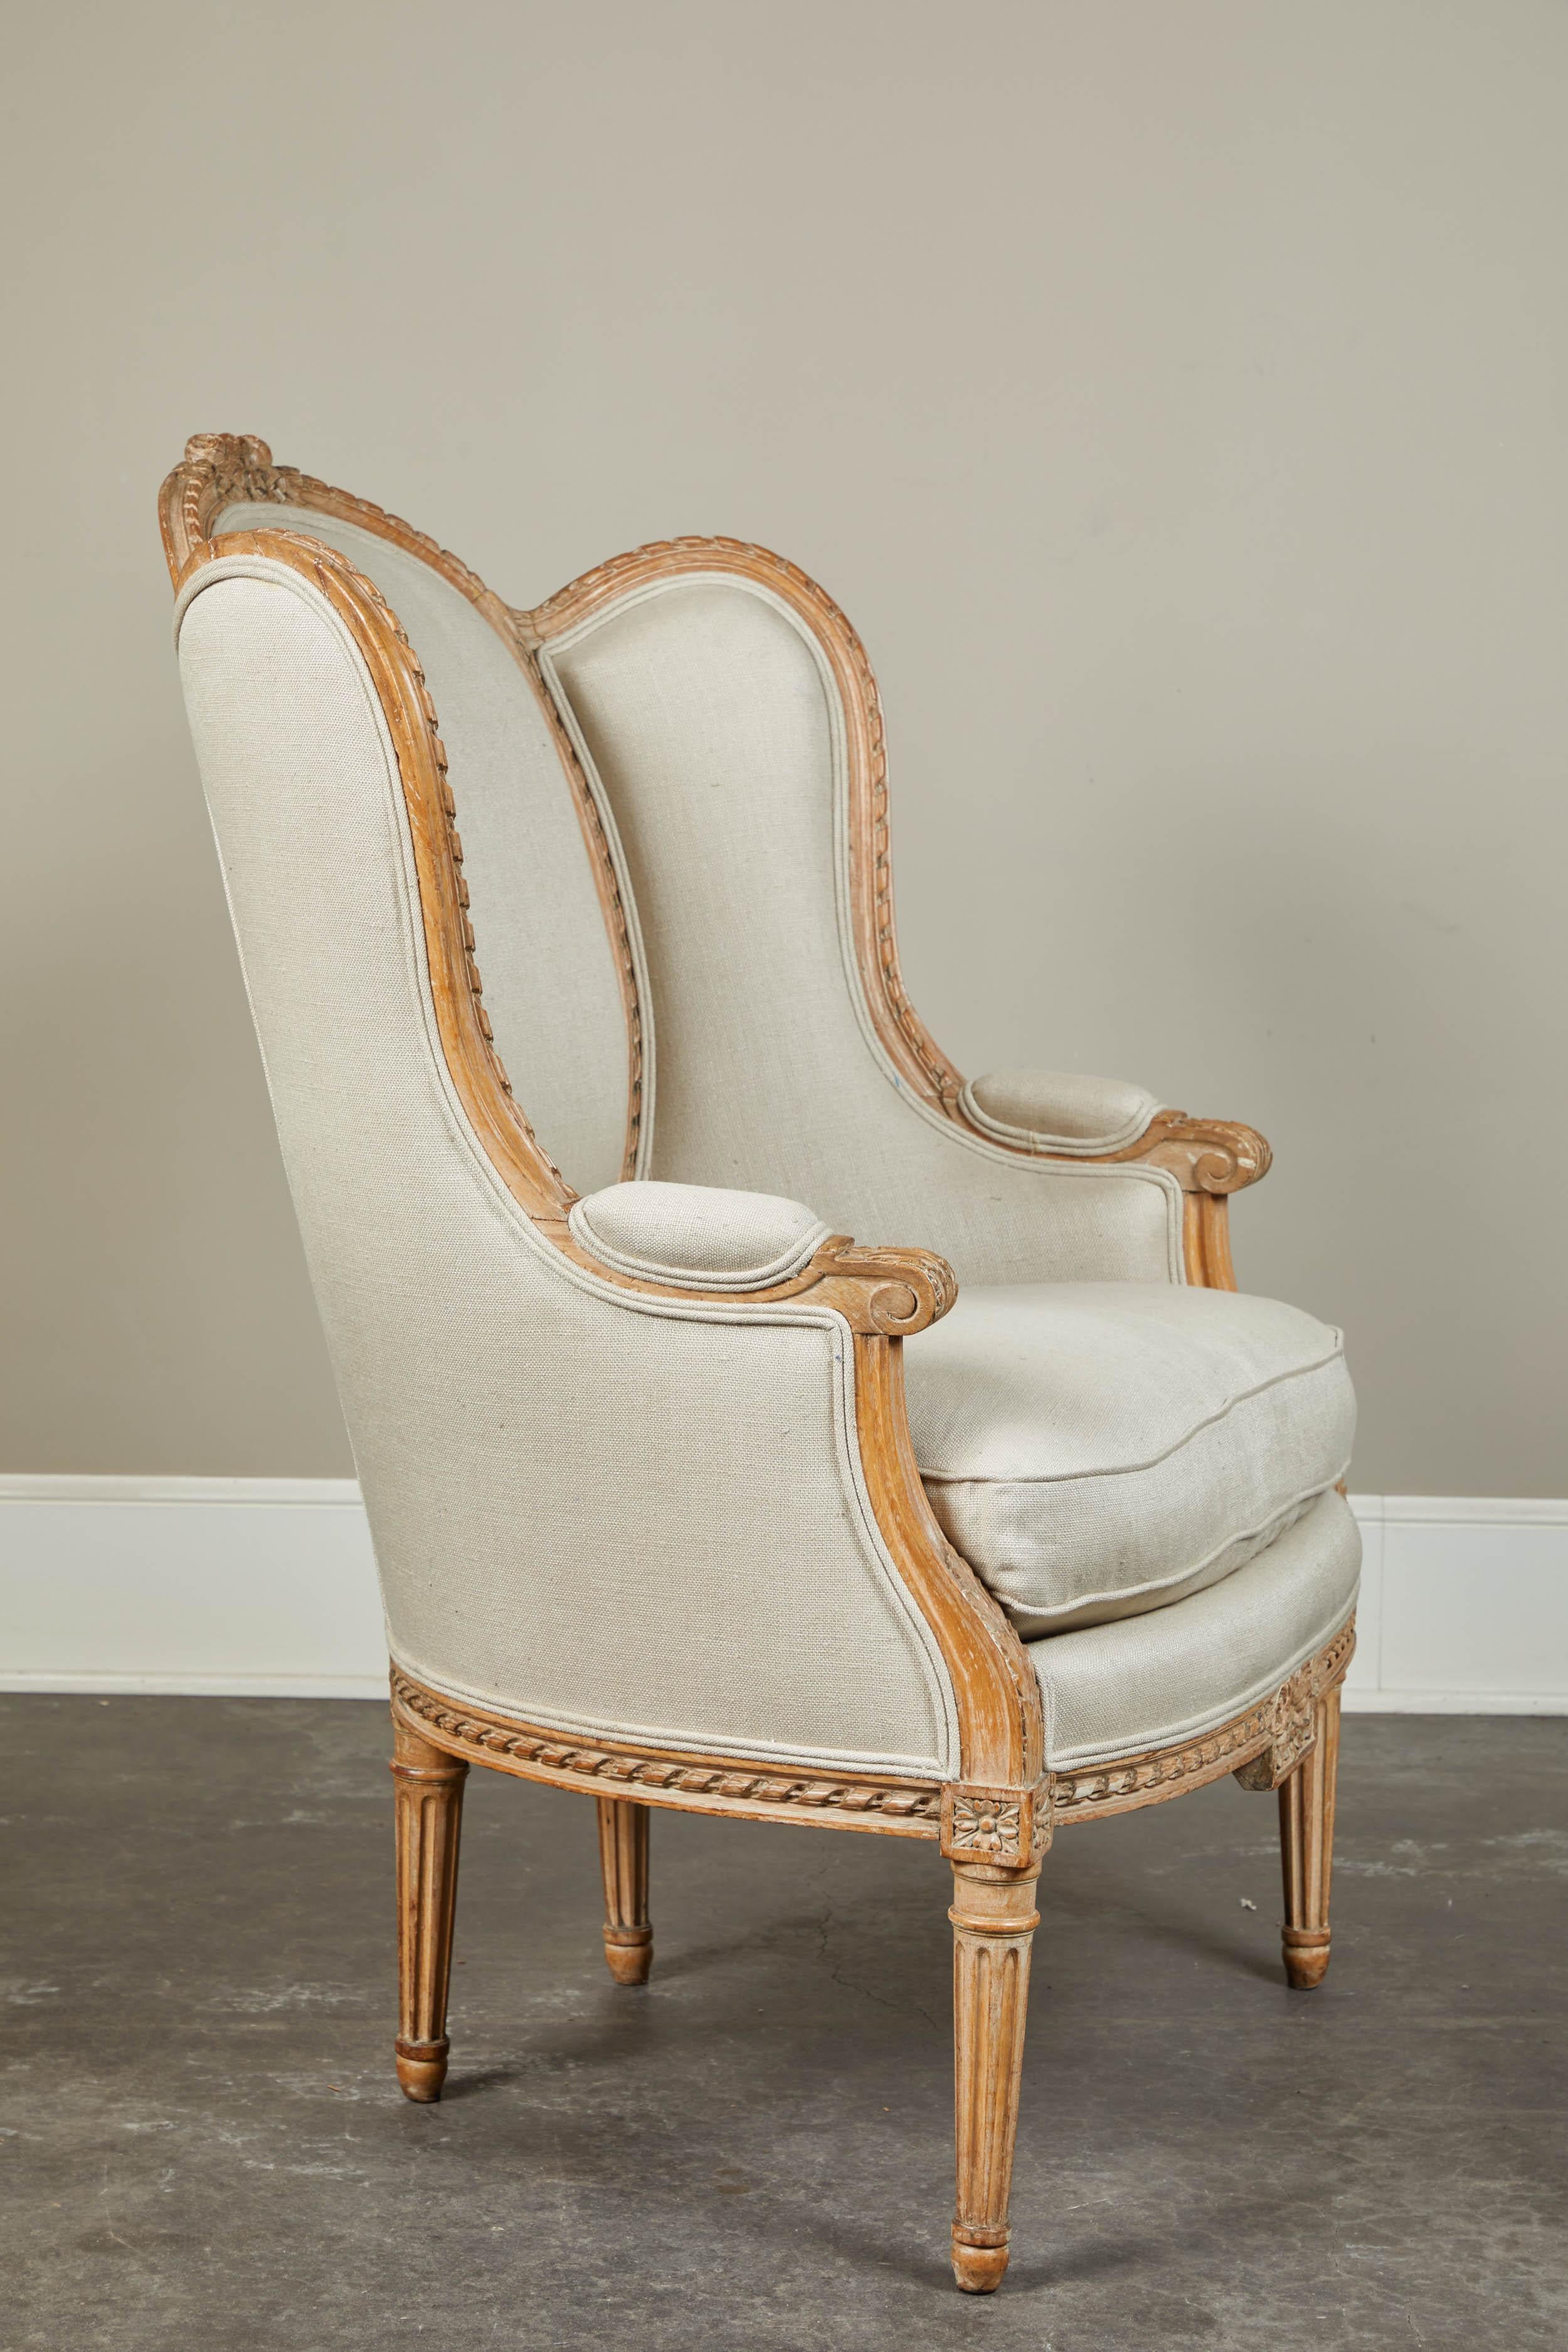 19th Century French Carved Chair with Beige Upholstery For Sale 3